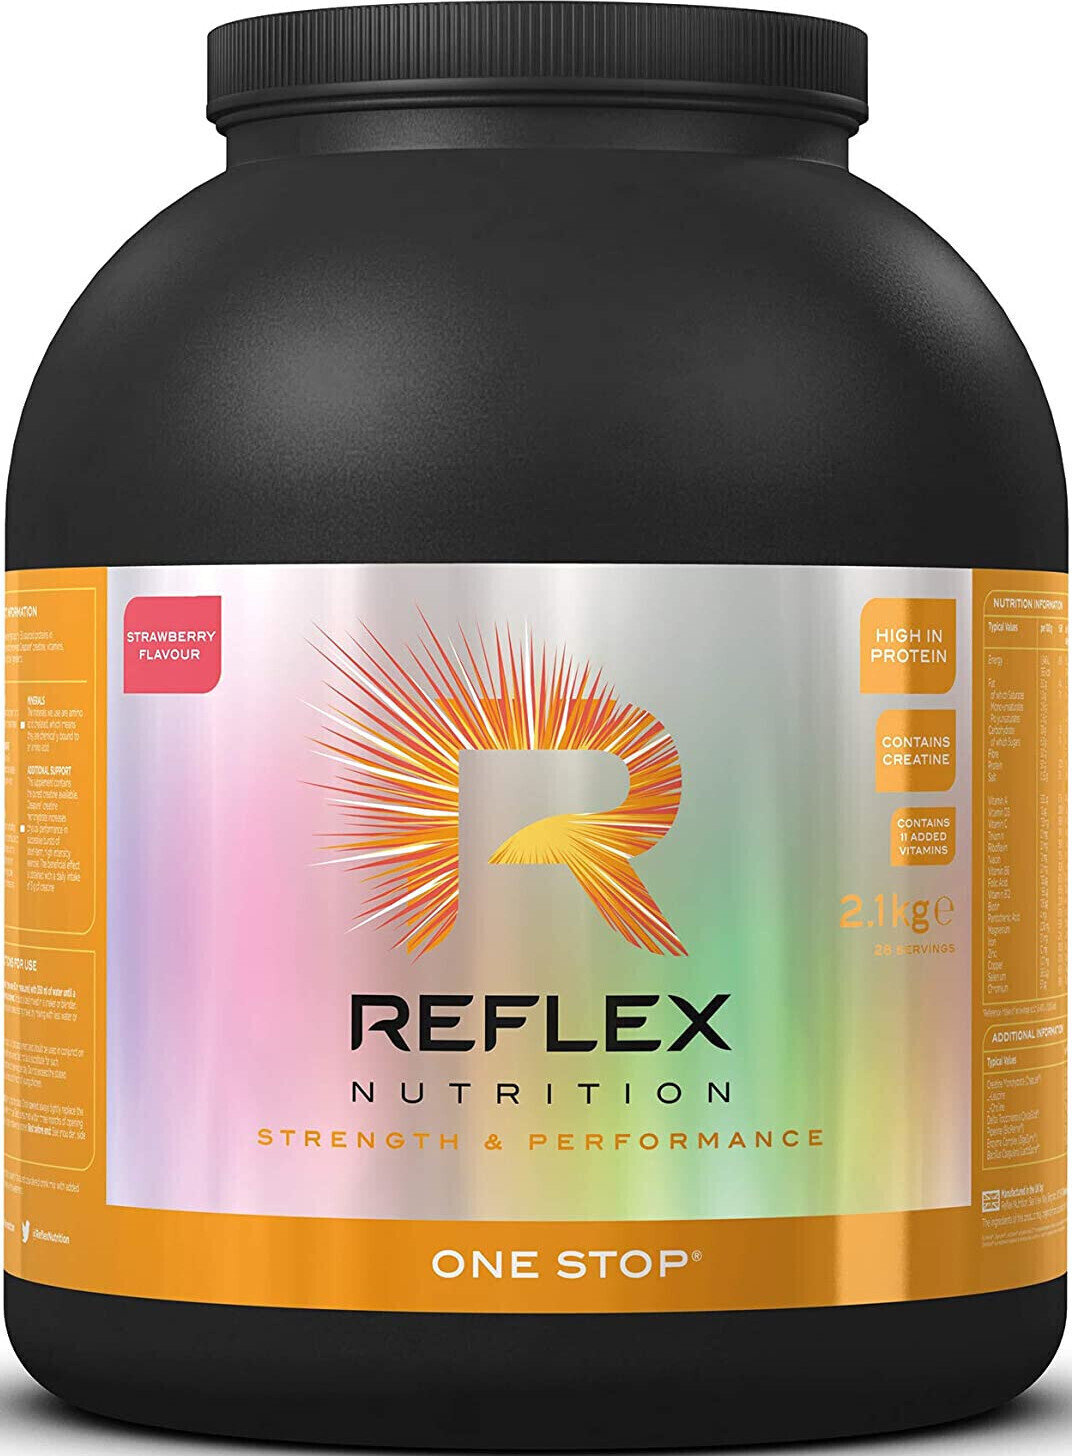 Anabolizers and Pre-workout Stimulant Reflex Nutrition One Stop Strawberry 2100 g Anabolizers and Pre-workout Stimulant